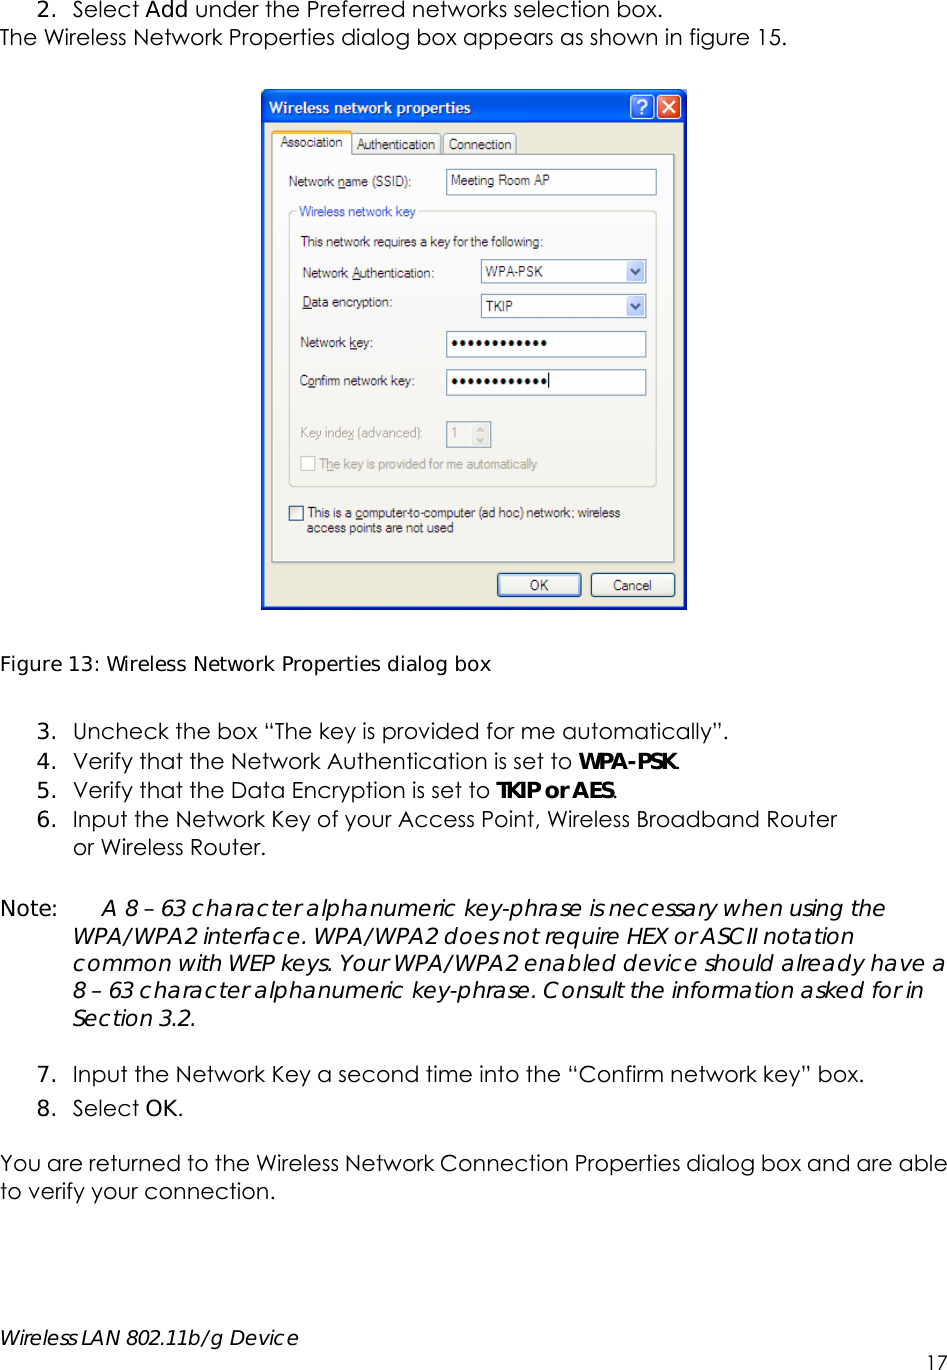     Wireless LAN 802.11b/g Device        17  2. Select Add under the Preferred networks selection box.   The Wireless Network Properties dialog box appears as shown in figure 15.    Figure 13: Wireless Network Properties dialog box  3. Uncheck the box “The key is provided for me automatically”. 4. Verify that the Network Authentication is set to WPA-PSK. 5. Verify that the Data Encryption is set to TKIP or AES. 6. Input the Network Key of your Access Point, Wireless Broadband Router   or Wireless Router.  Note:    A 8 – 63 character alphanumeric key-phrase is necessary when using the WPA/WPA2 interface. WPA/WPA2 does not require HEX or ASCII notation common with WEP keys. Your WPA/WPA2 enabled device should already have a 8 – 63 character alphanumeric key-phrase. Consult the information asked for in Section 3.2.  7. Input the Network Key a second time into the “Confirm network key” box. 8. Select OK.  You are returned to the Wireless Network Connection Properties dialog box and are able to verify your connection.    